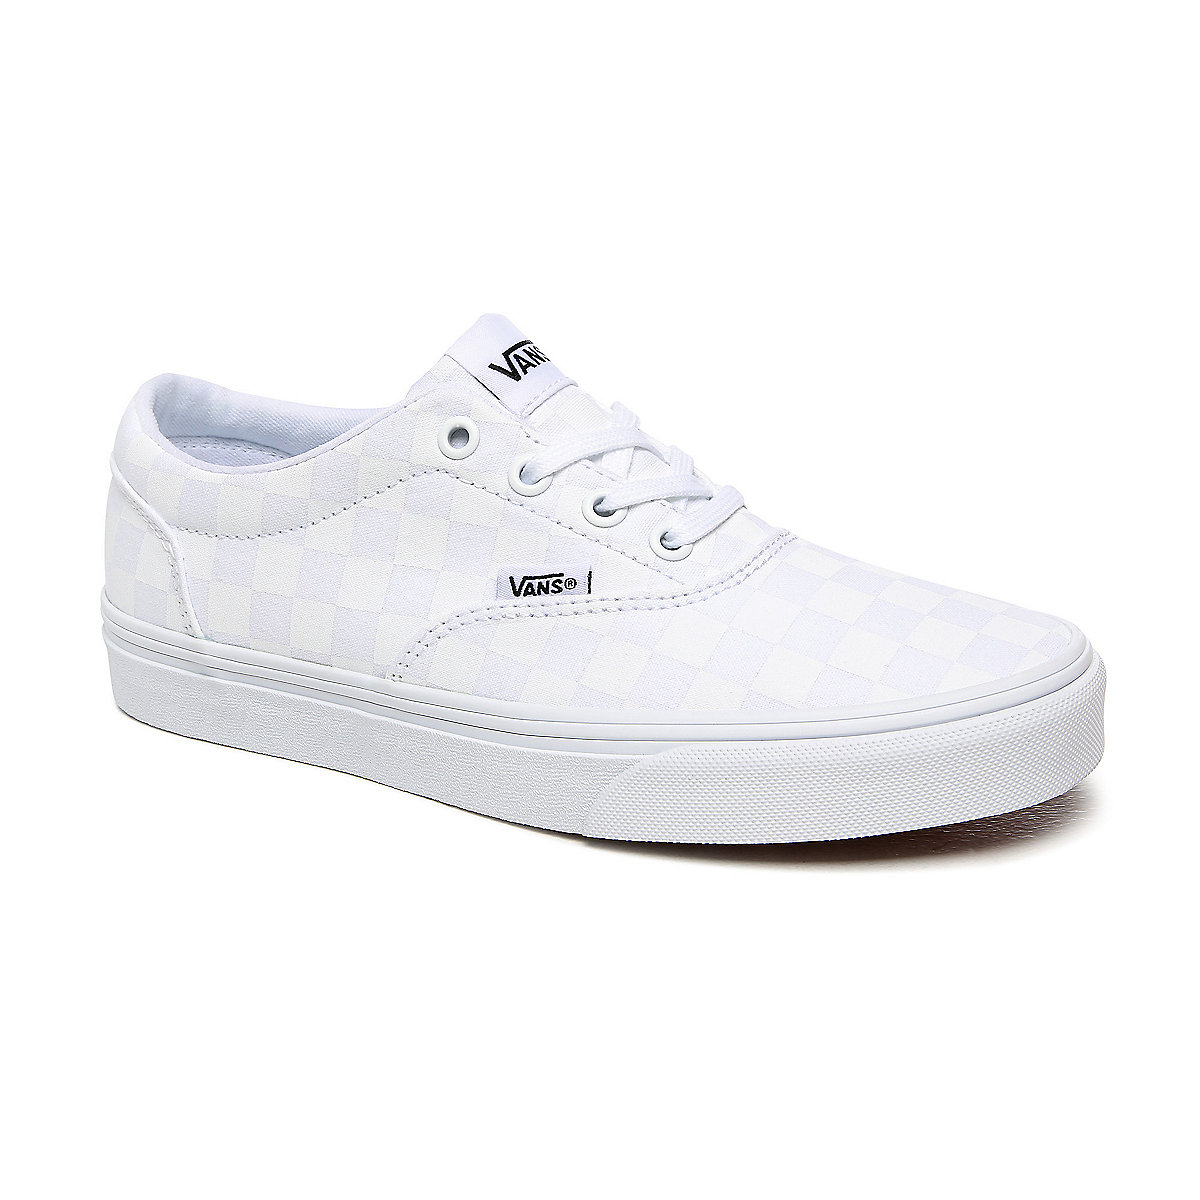 chaussures skate femme doheny